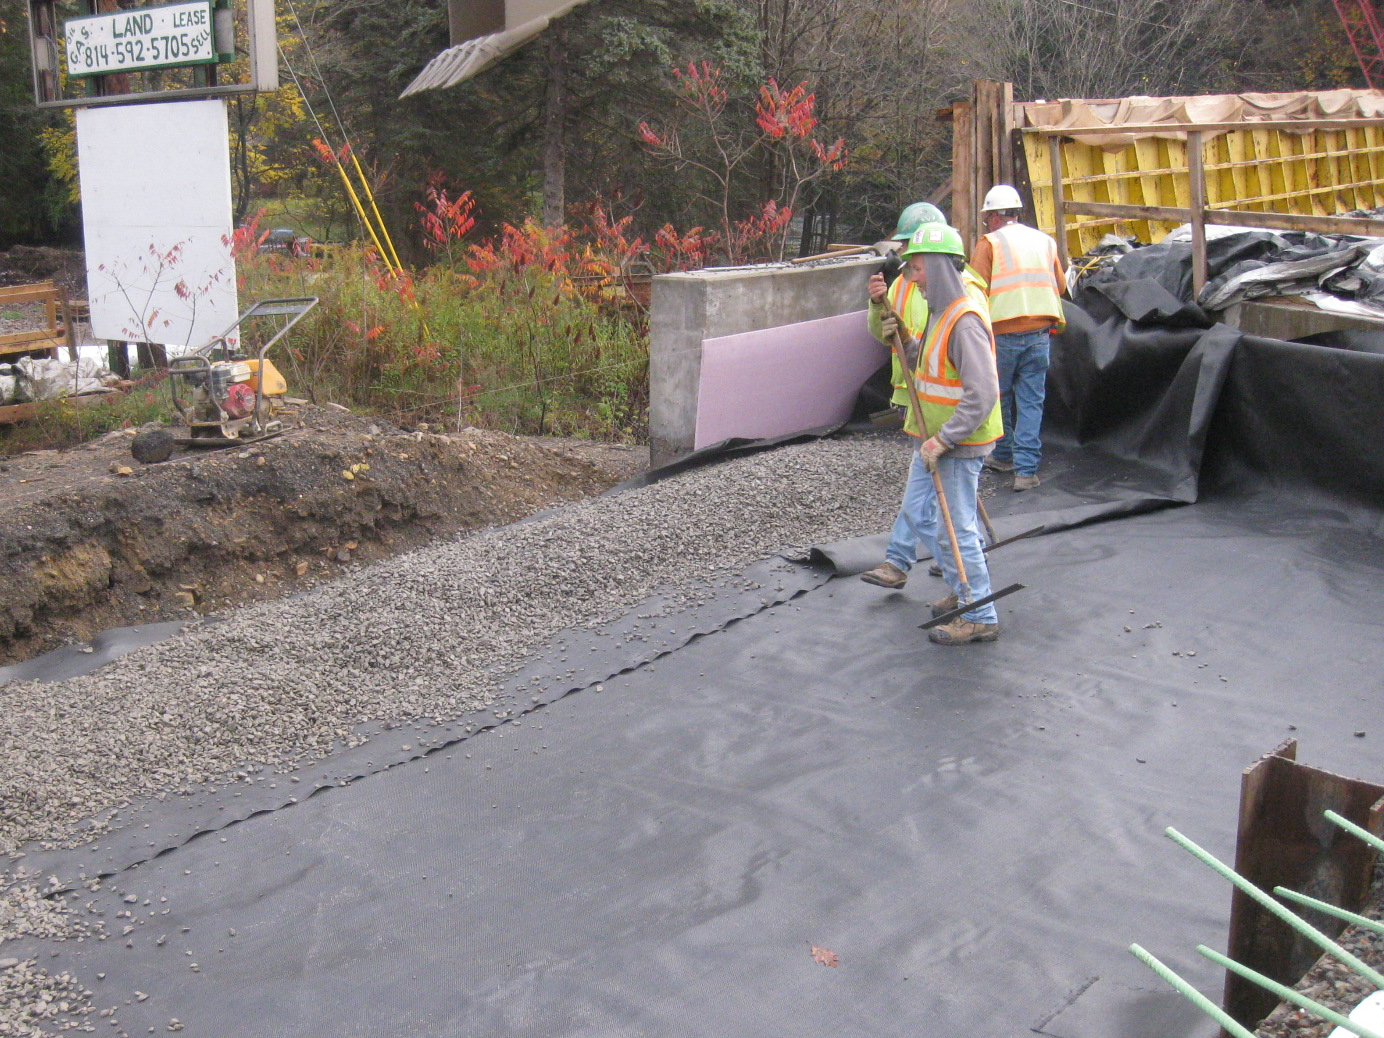 Construction workers spreading gravel over a tarp.